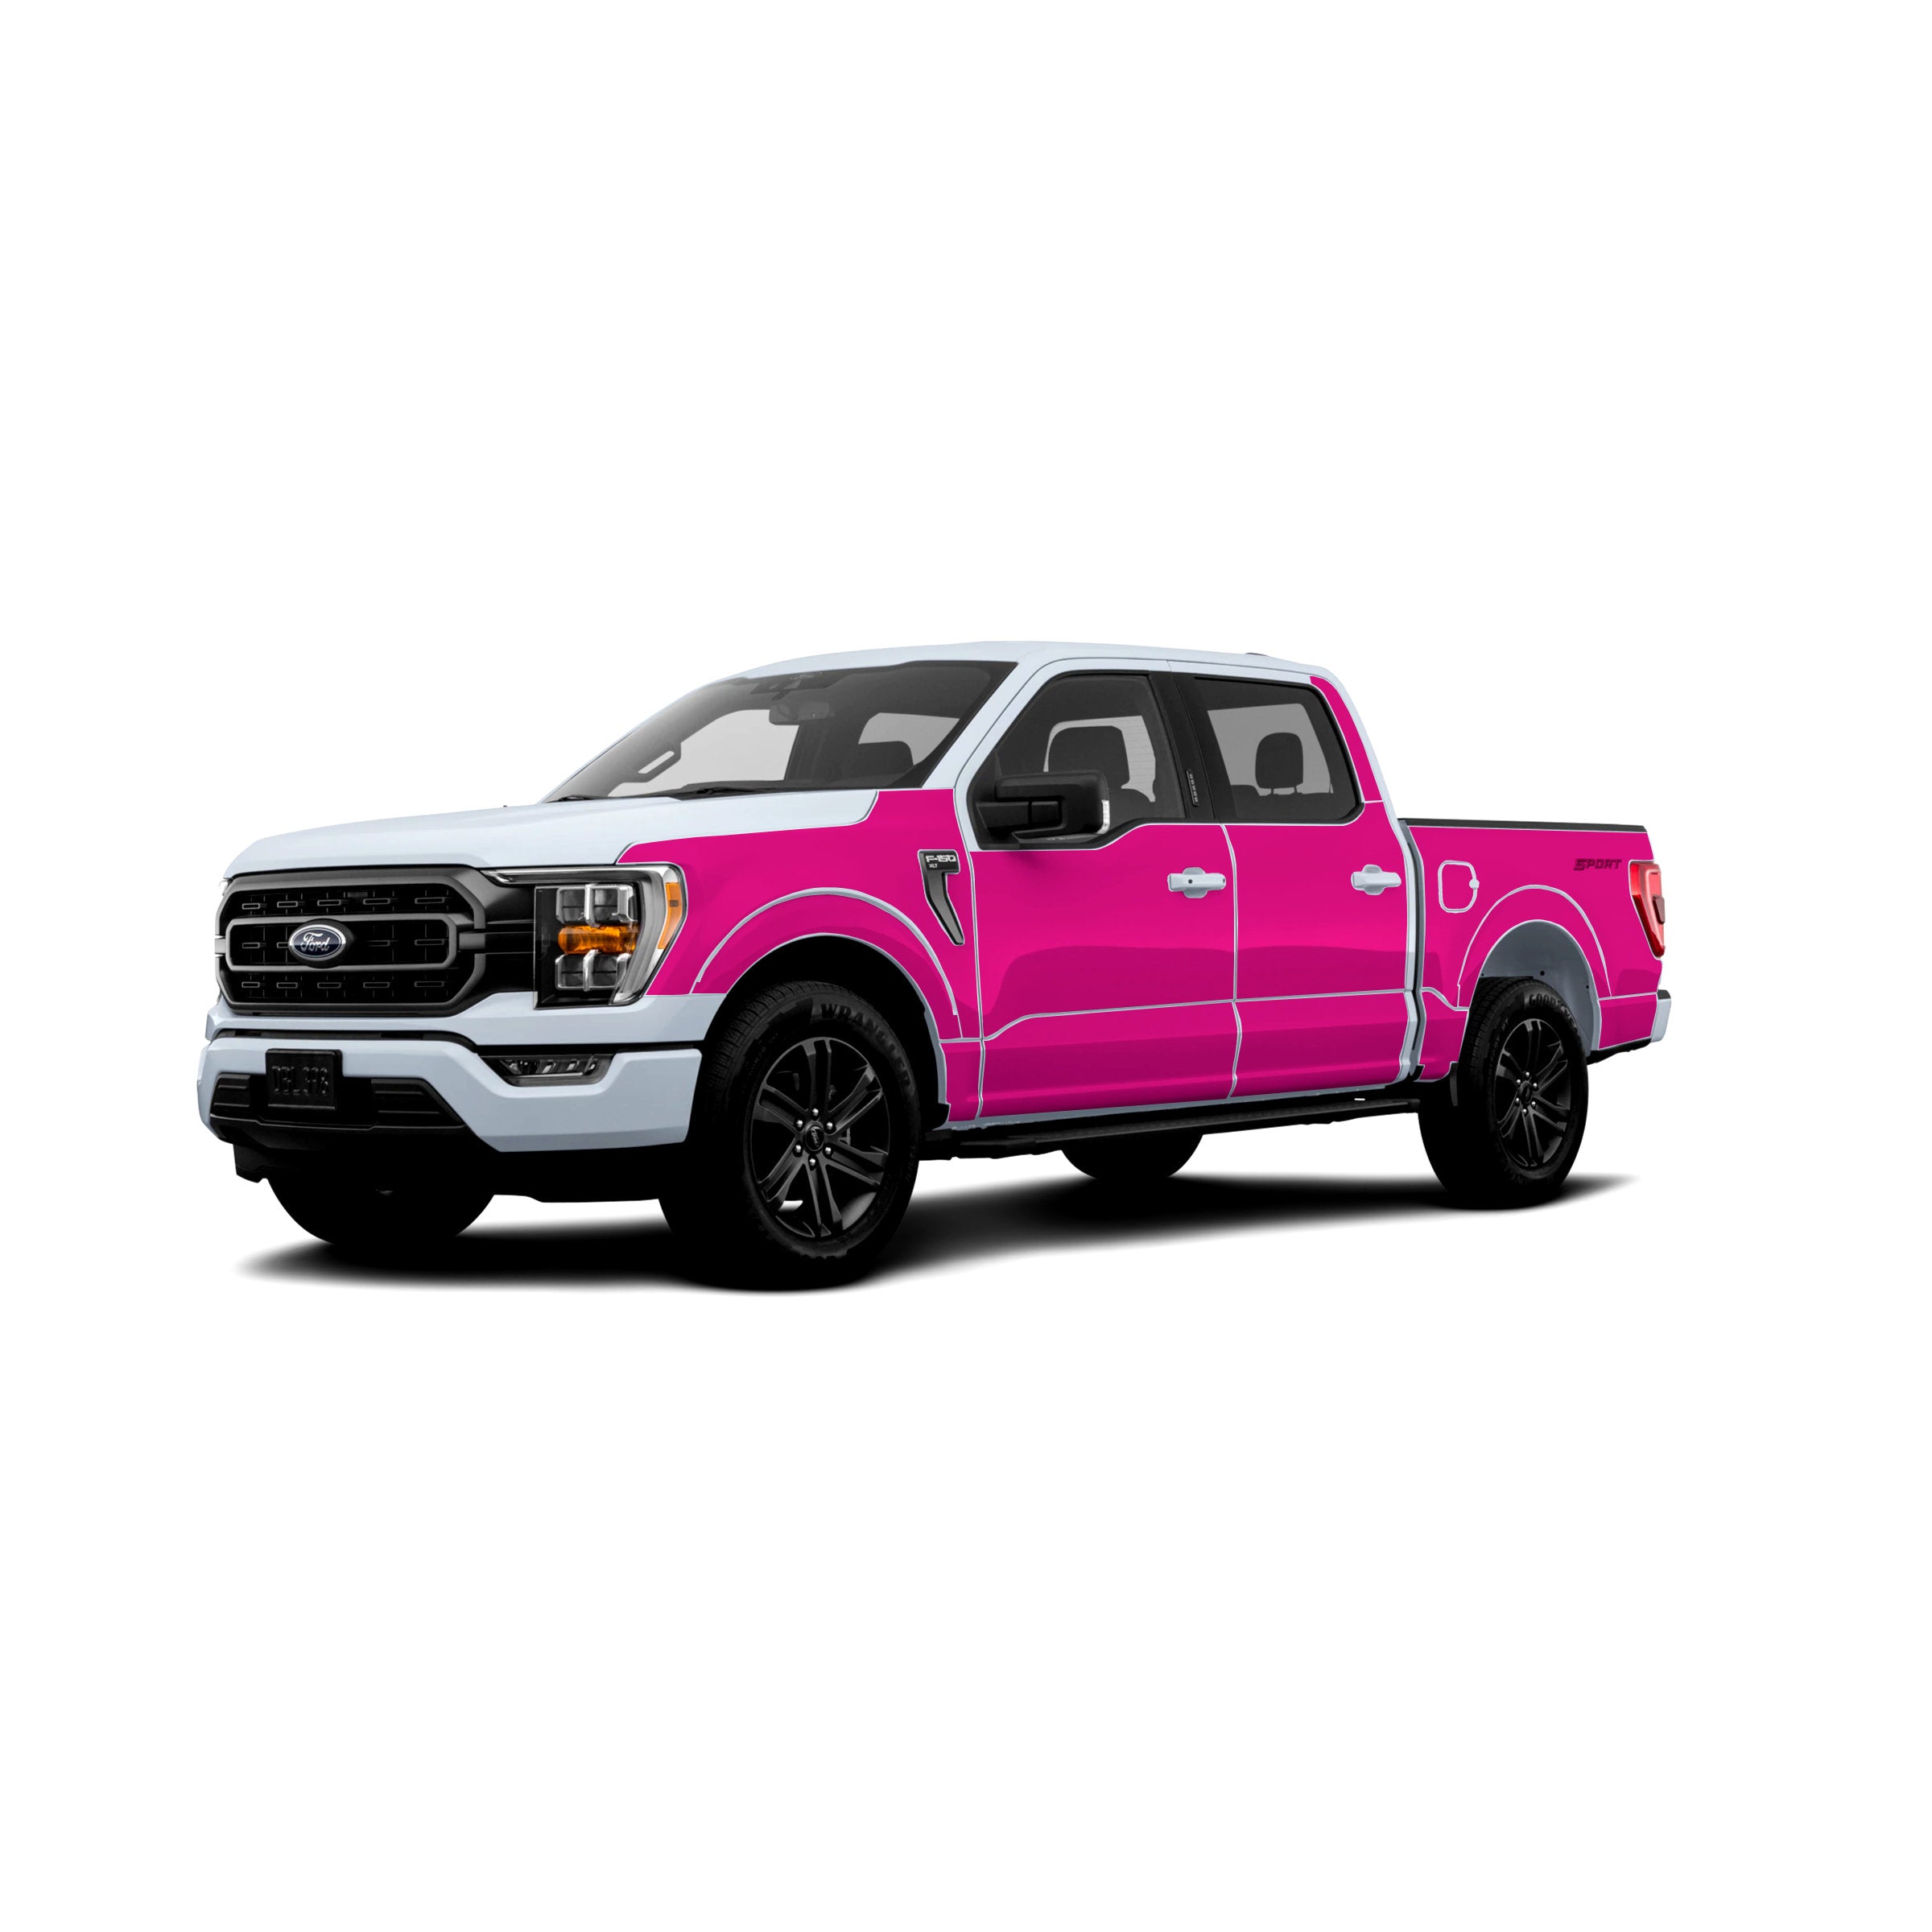 Bushwrapz DIY Paint Protection Film (PPF) Kit - To Suit Ford F150 - Tub Included